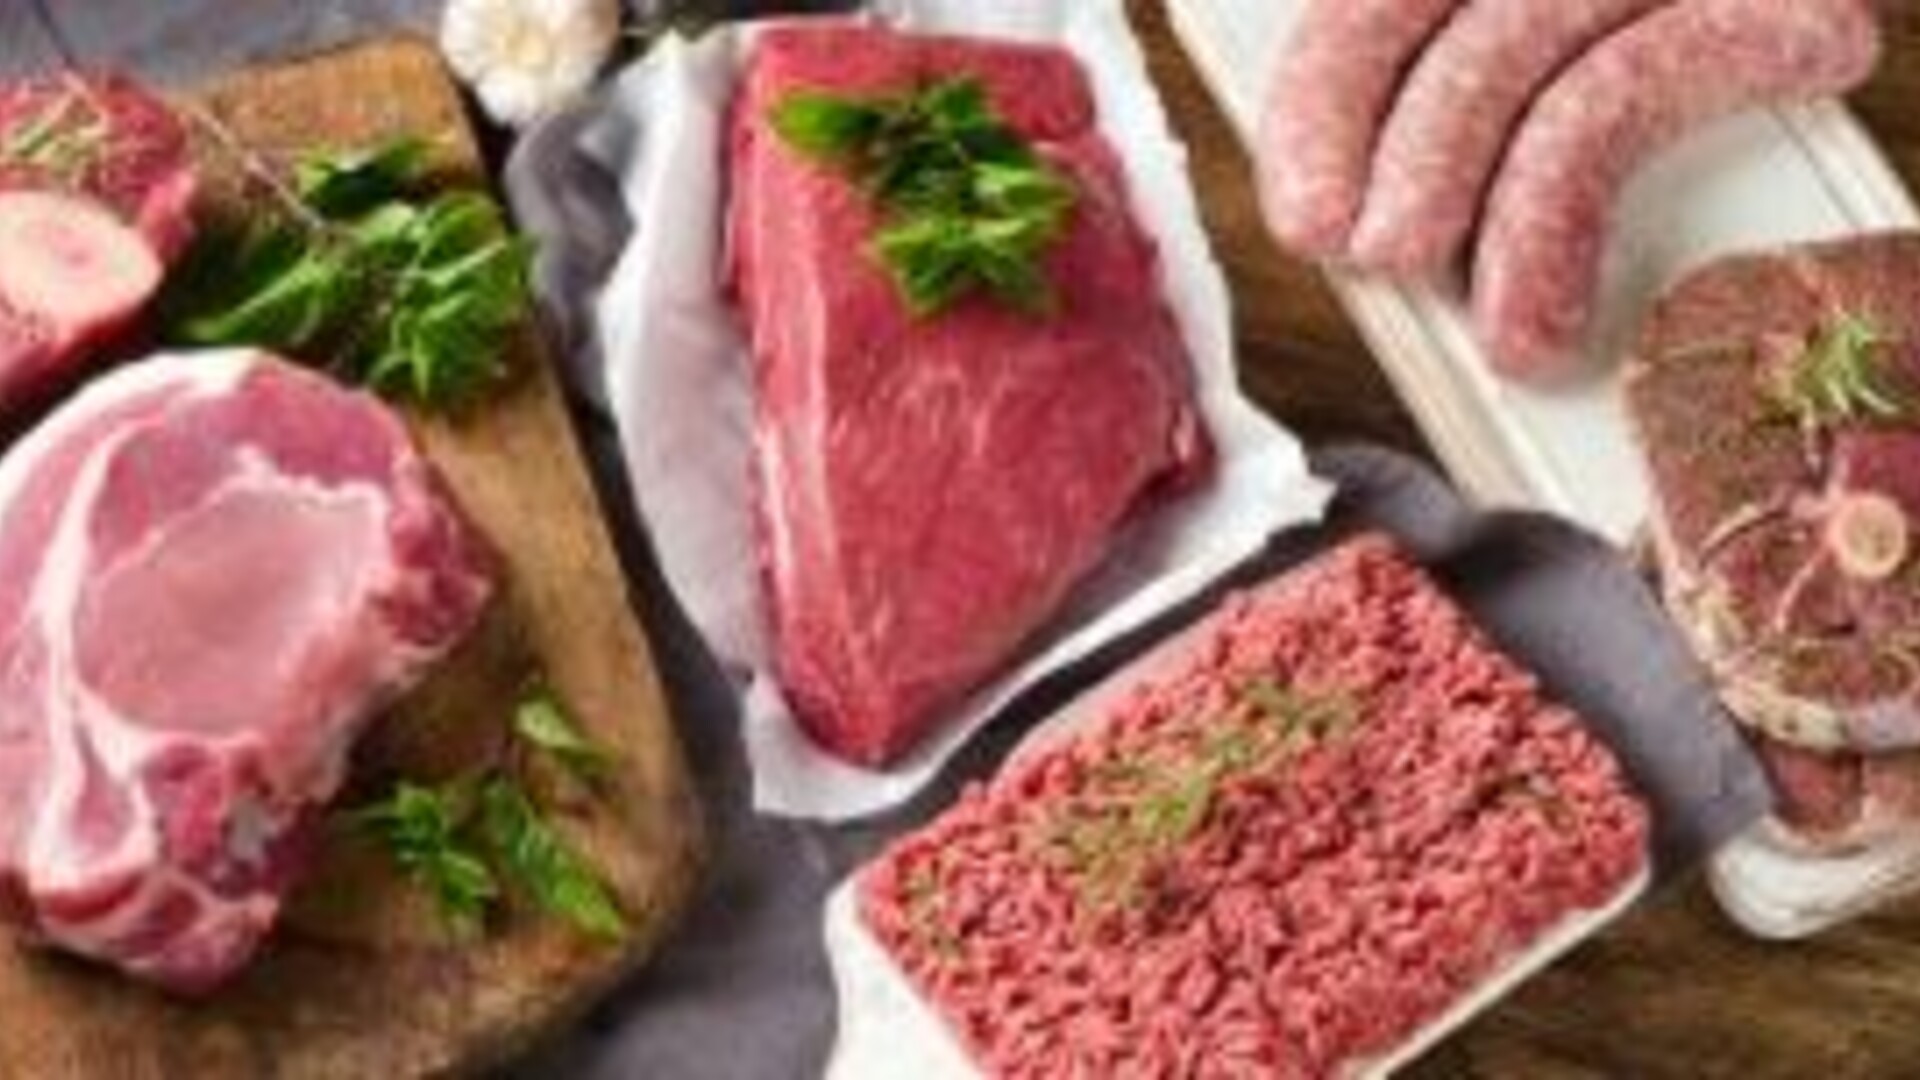 US Trade Mission Promotes US Meat Quality